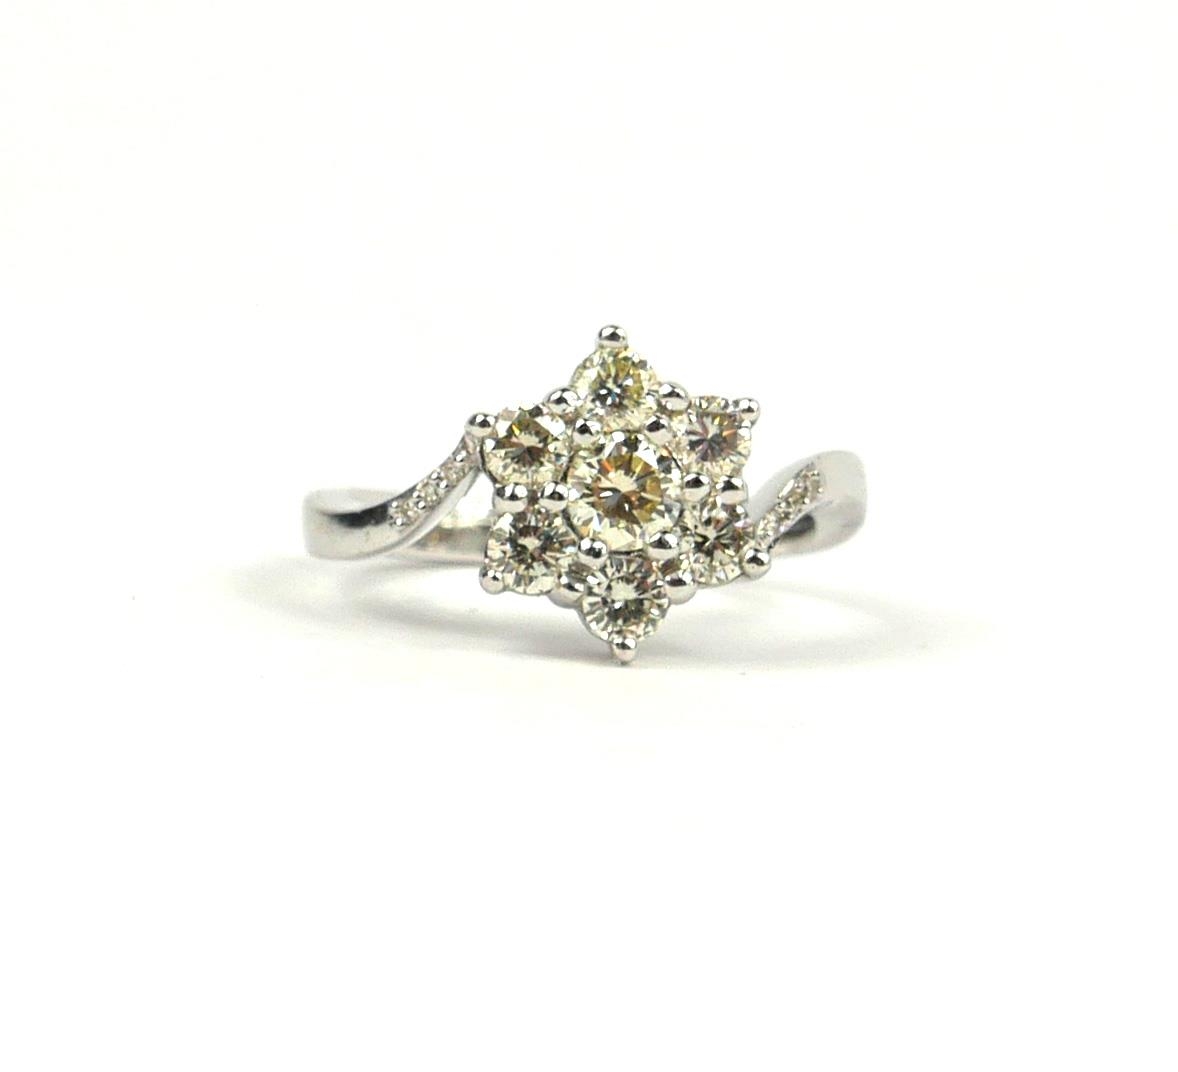 AN 18CT WHITE GOLD DIAMOND DAISY CLUSTER RING. (Approx 1.00ct) - Image 5 of 5